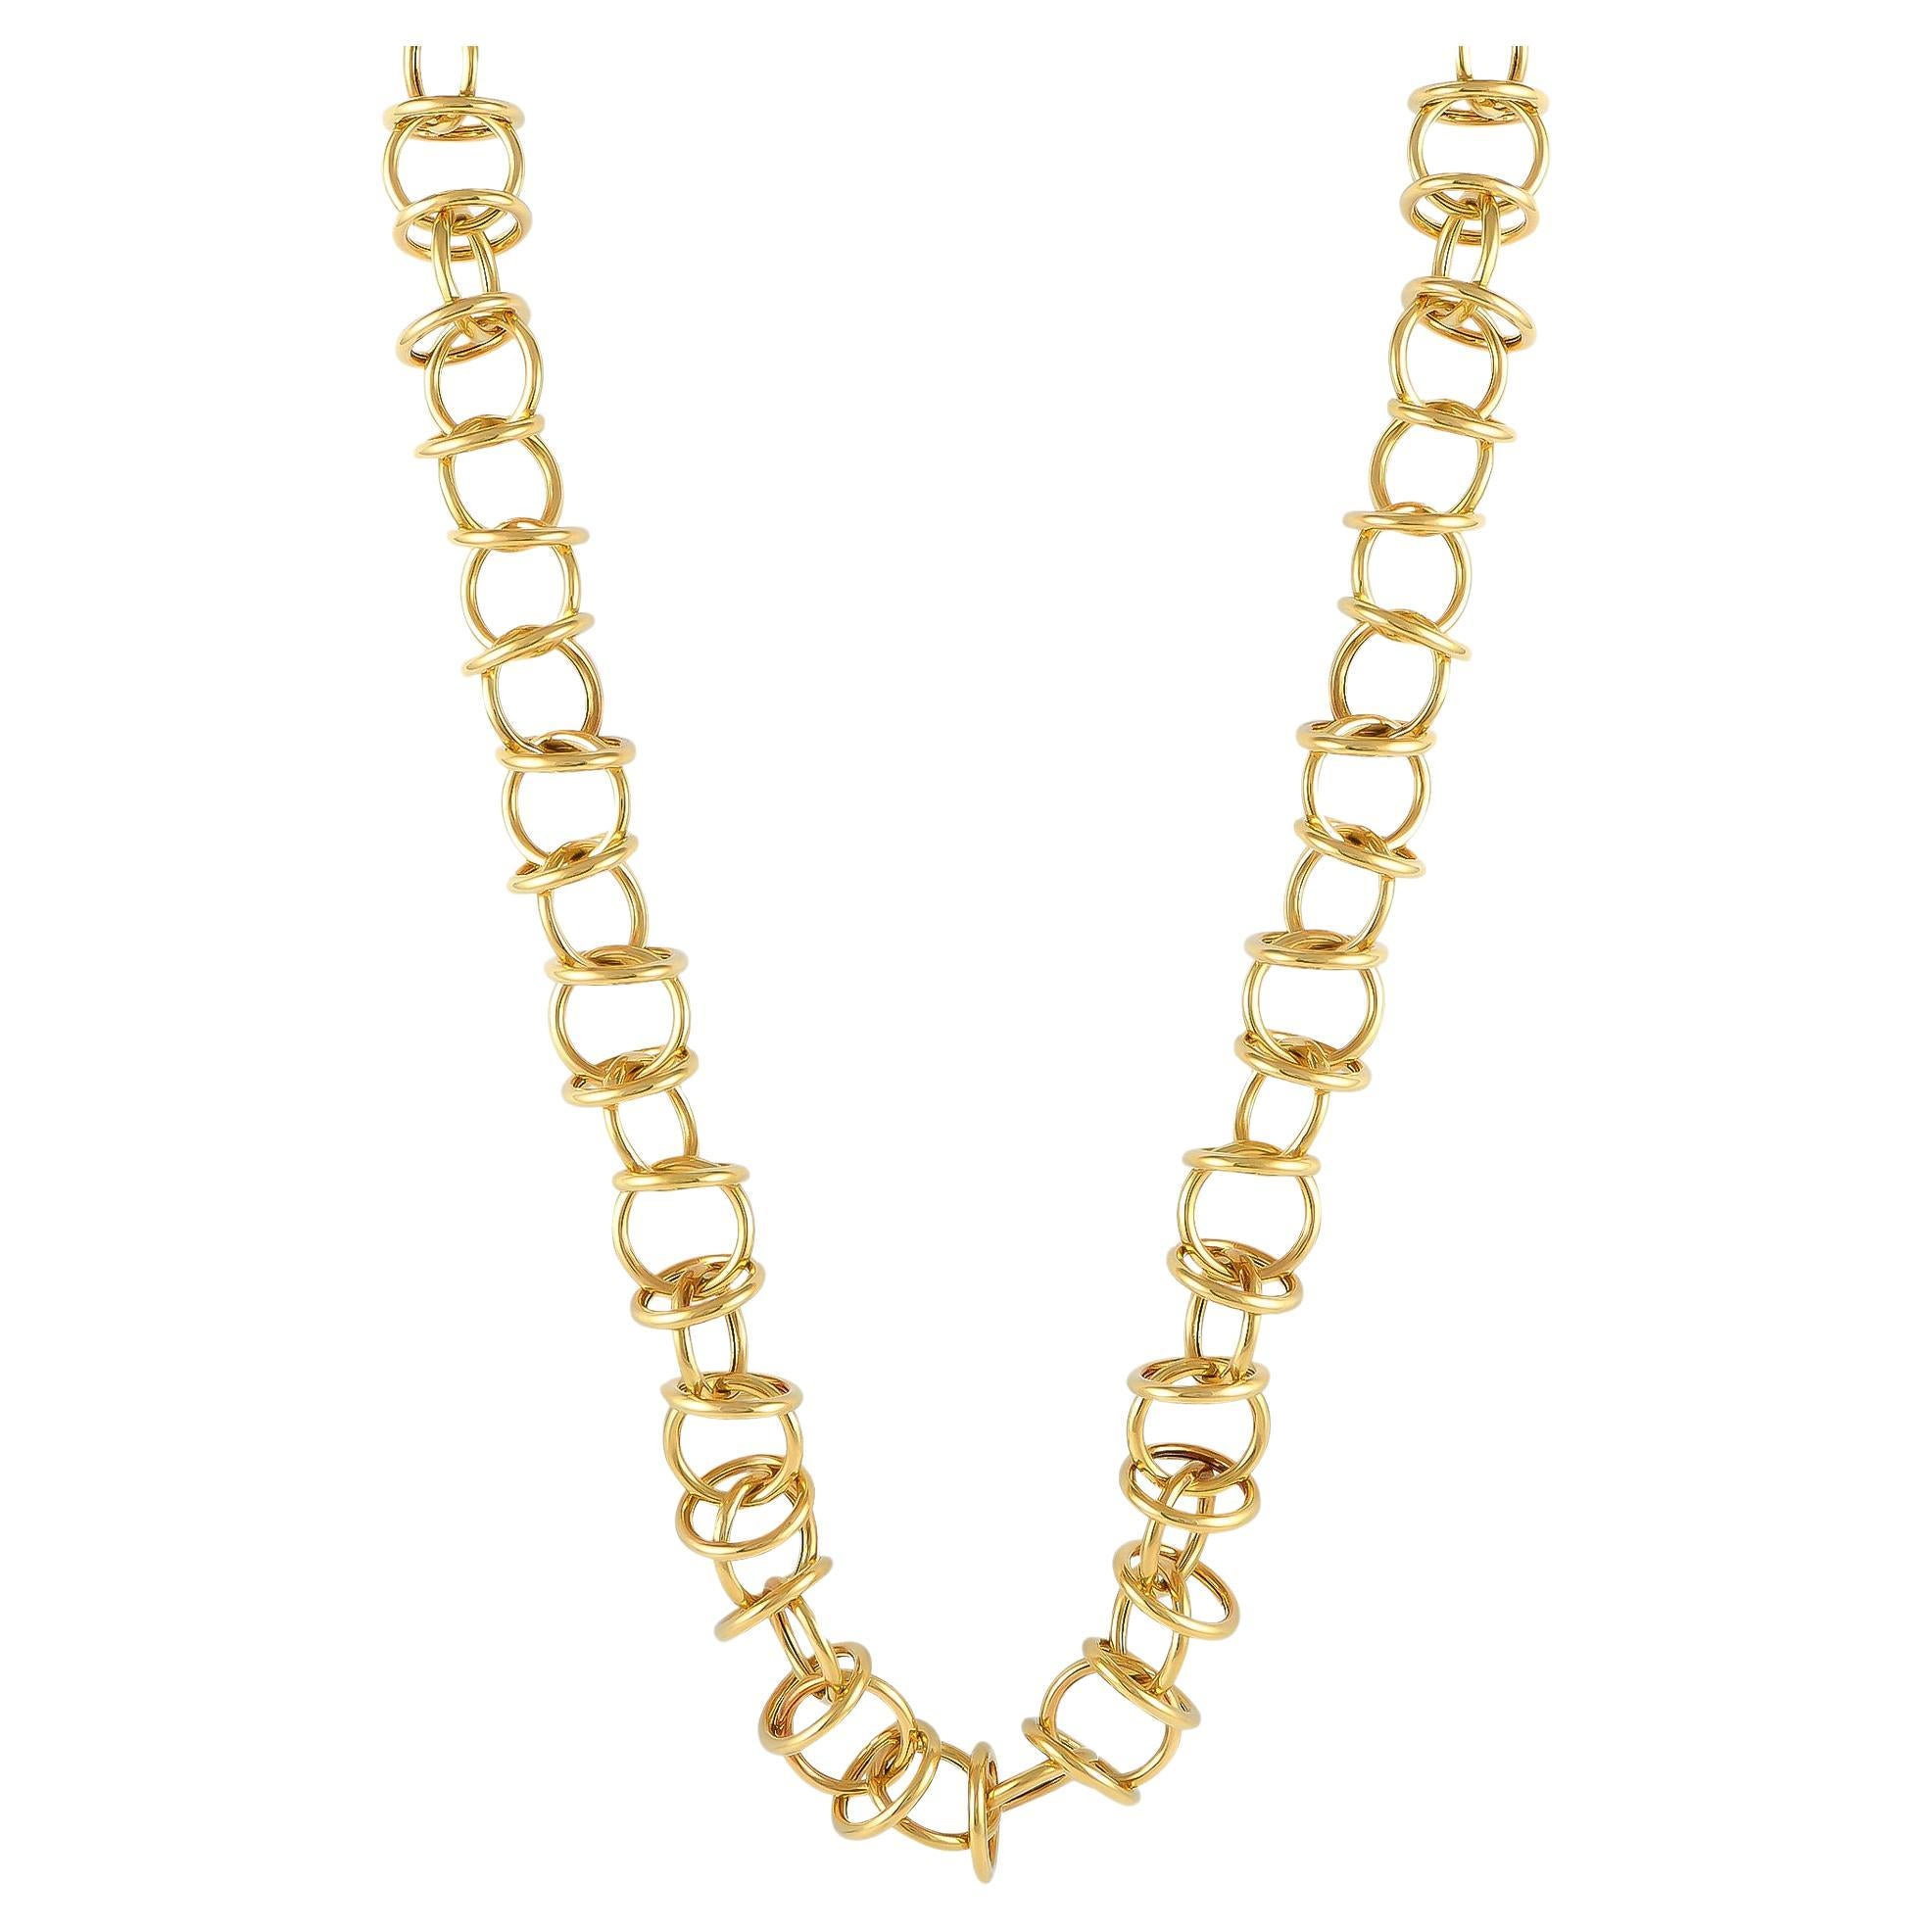 Tiffany & Co. 18K Yellow Gold Link Necklace